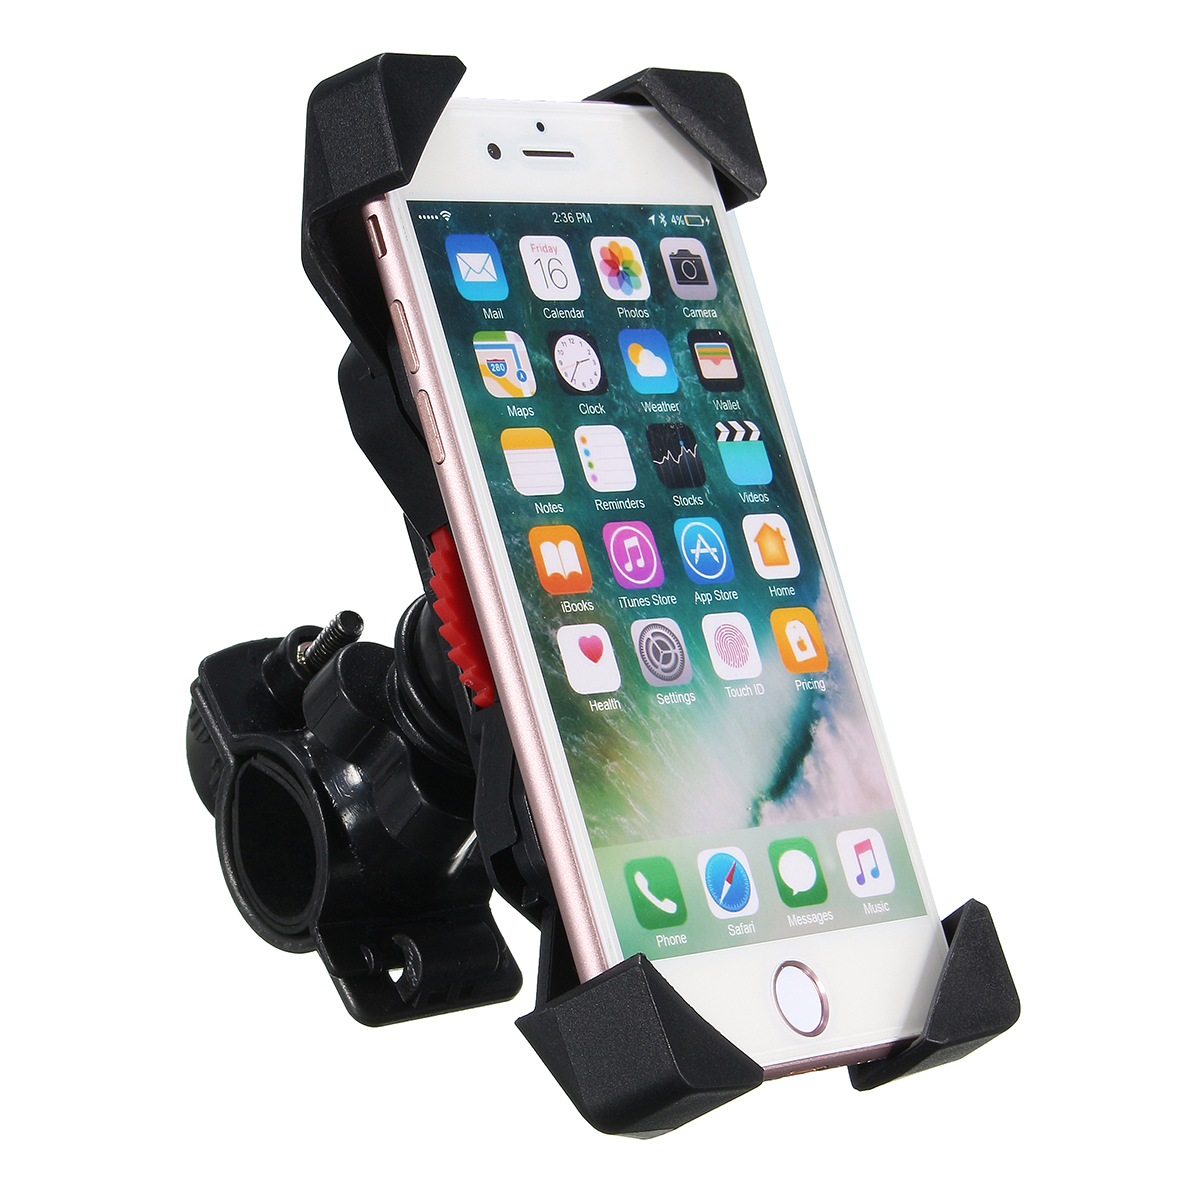 

Motorcycle Holder Bike Bicycle Handlebar Mount Mobile Phone Stand for 4.5-7 inches Phone